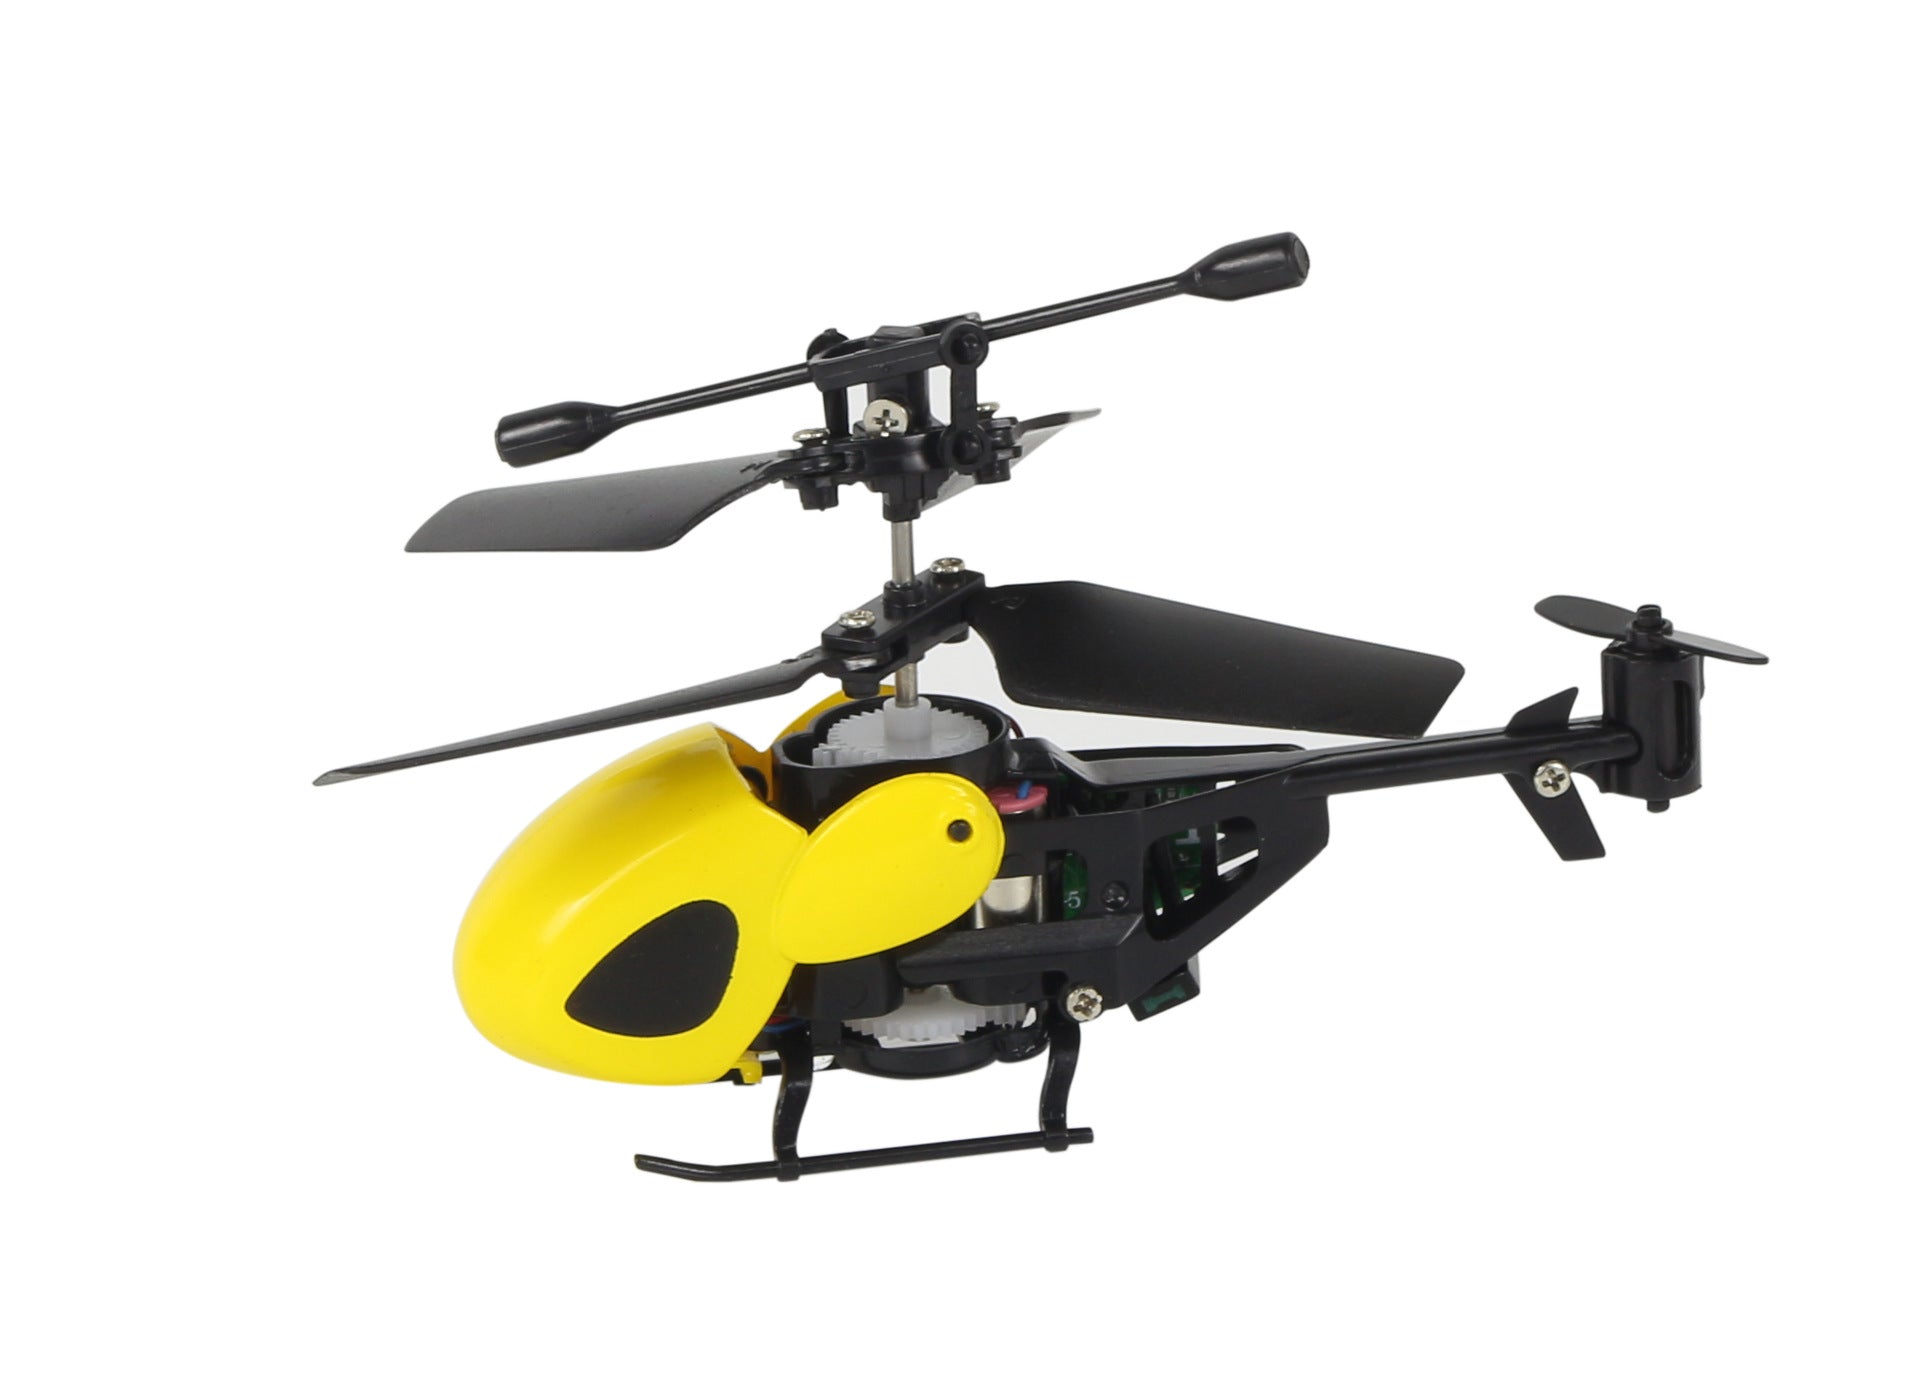  Mini Remote Control Helicopter Toy cashymart